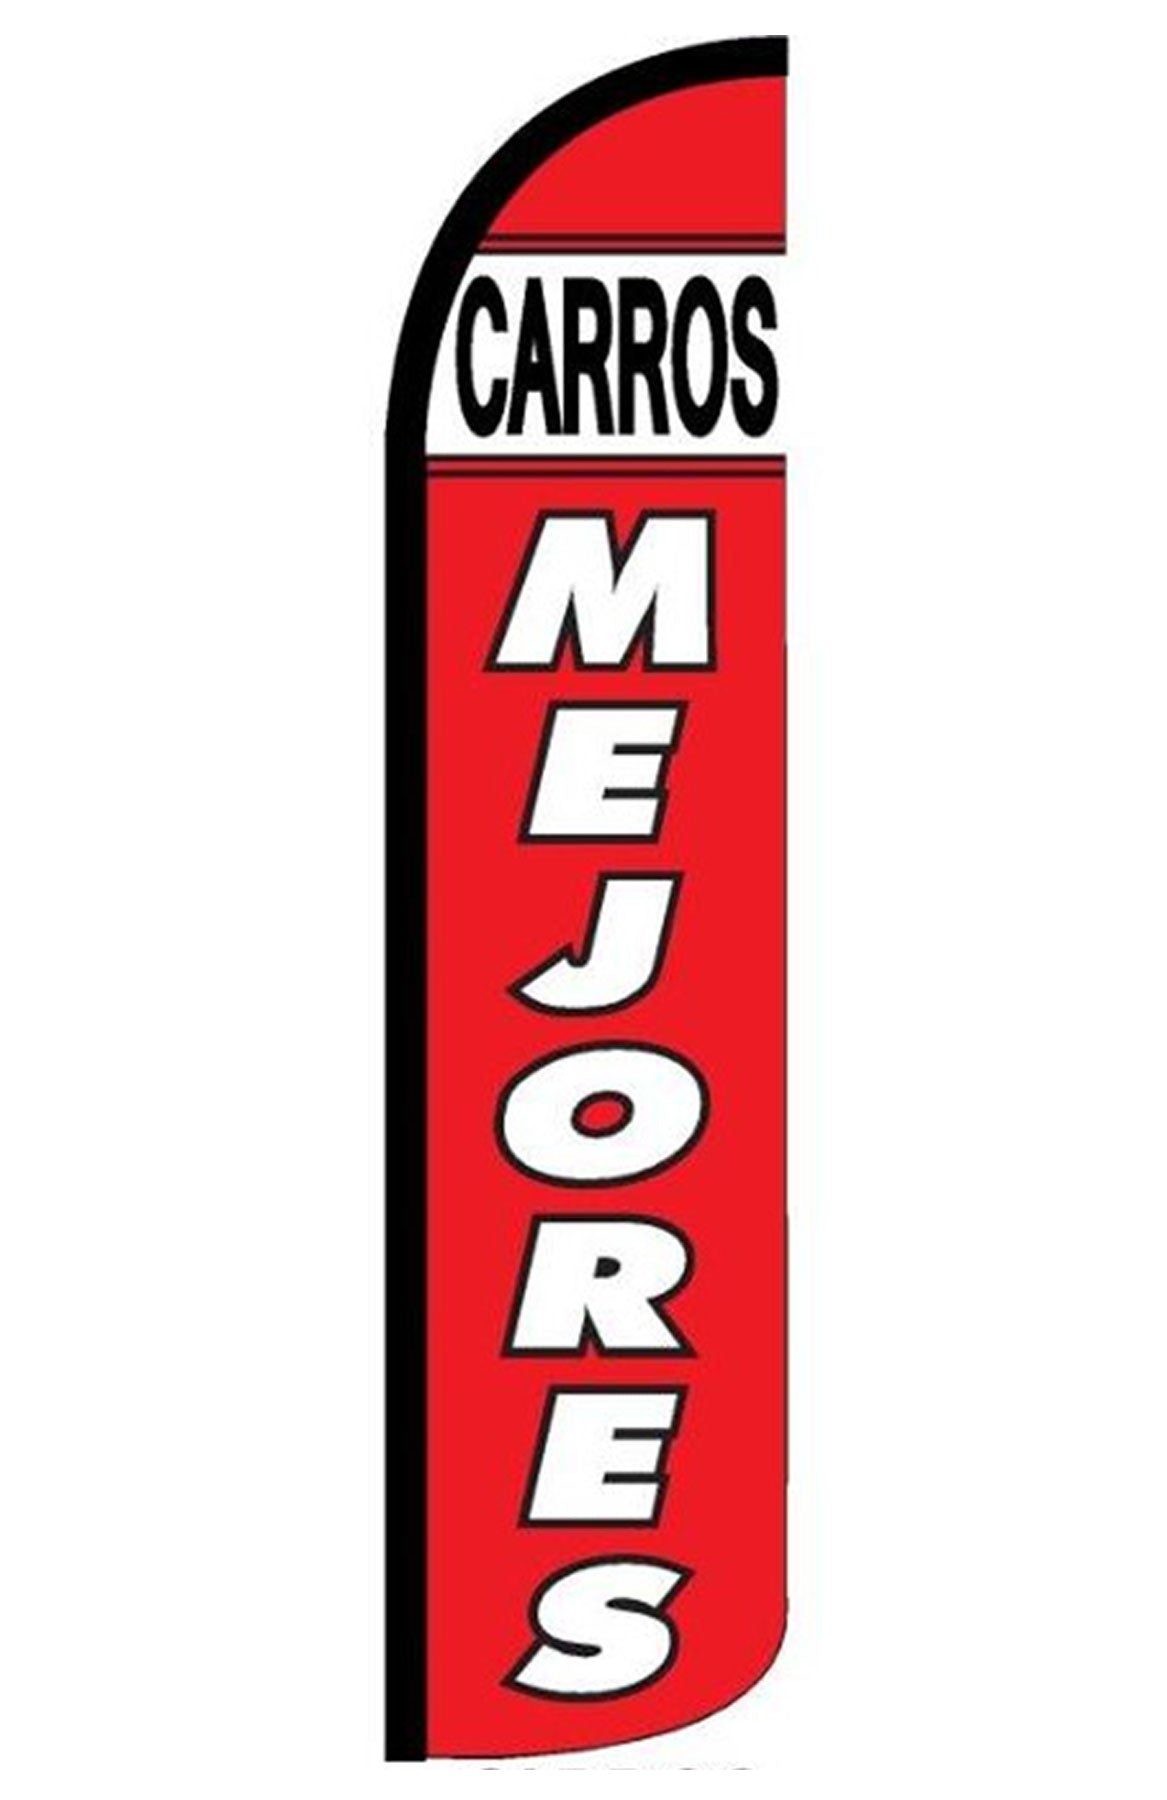 CARROS MEJORES (RED)